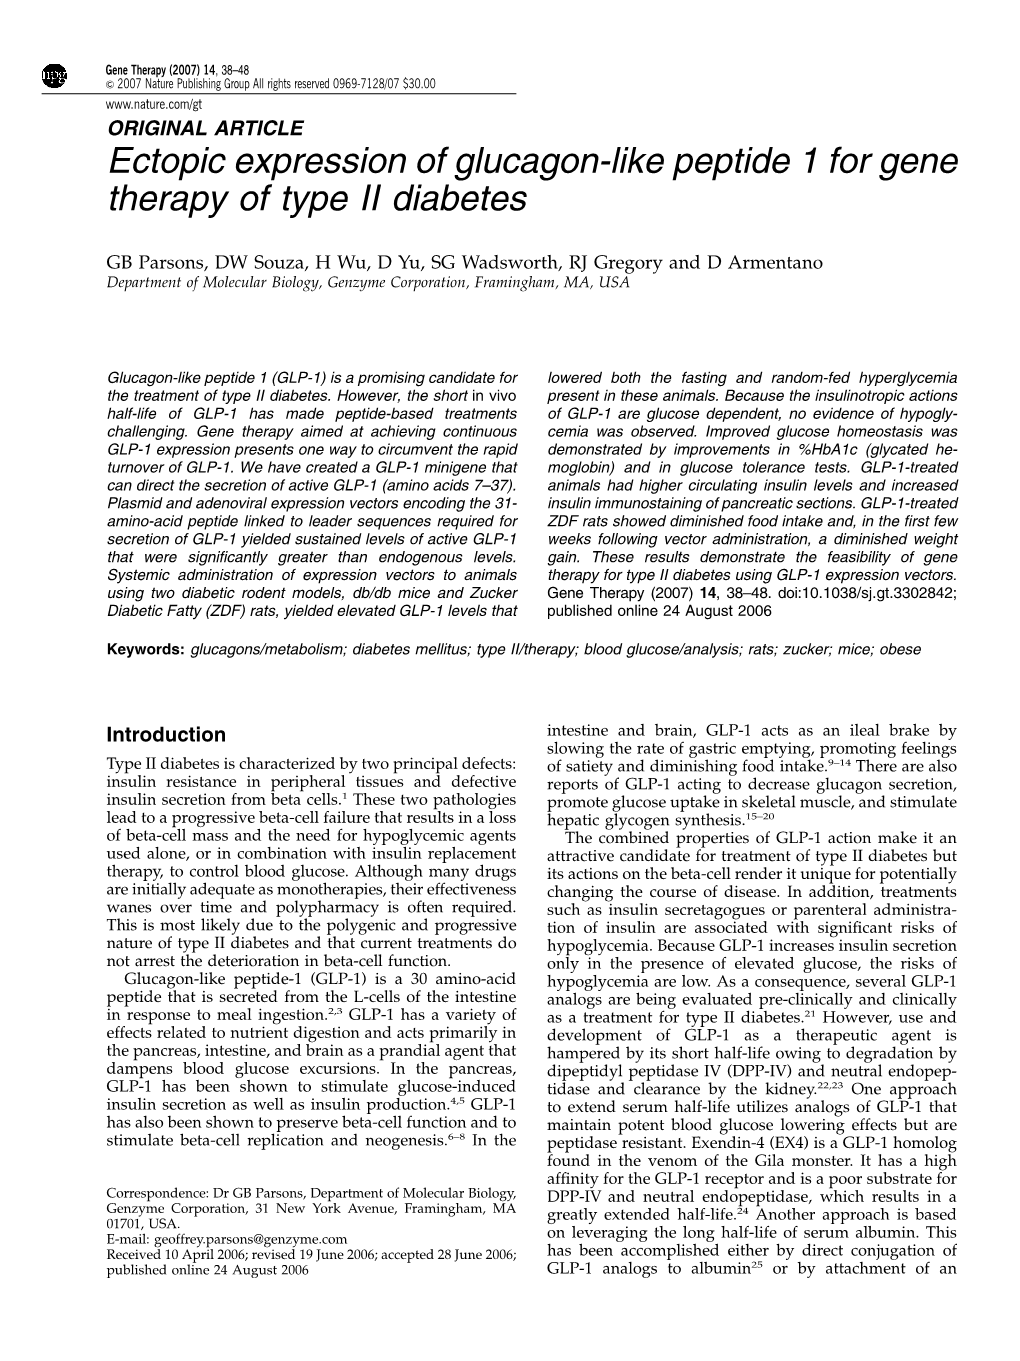 Ectopic Expression of Glucagon-Like Peptide 1 for Gene Therapy of Type II Diabetes